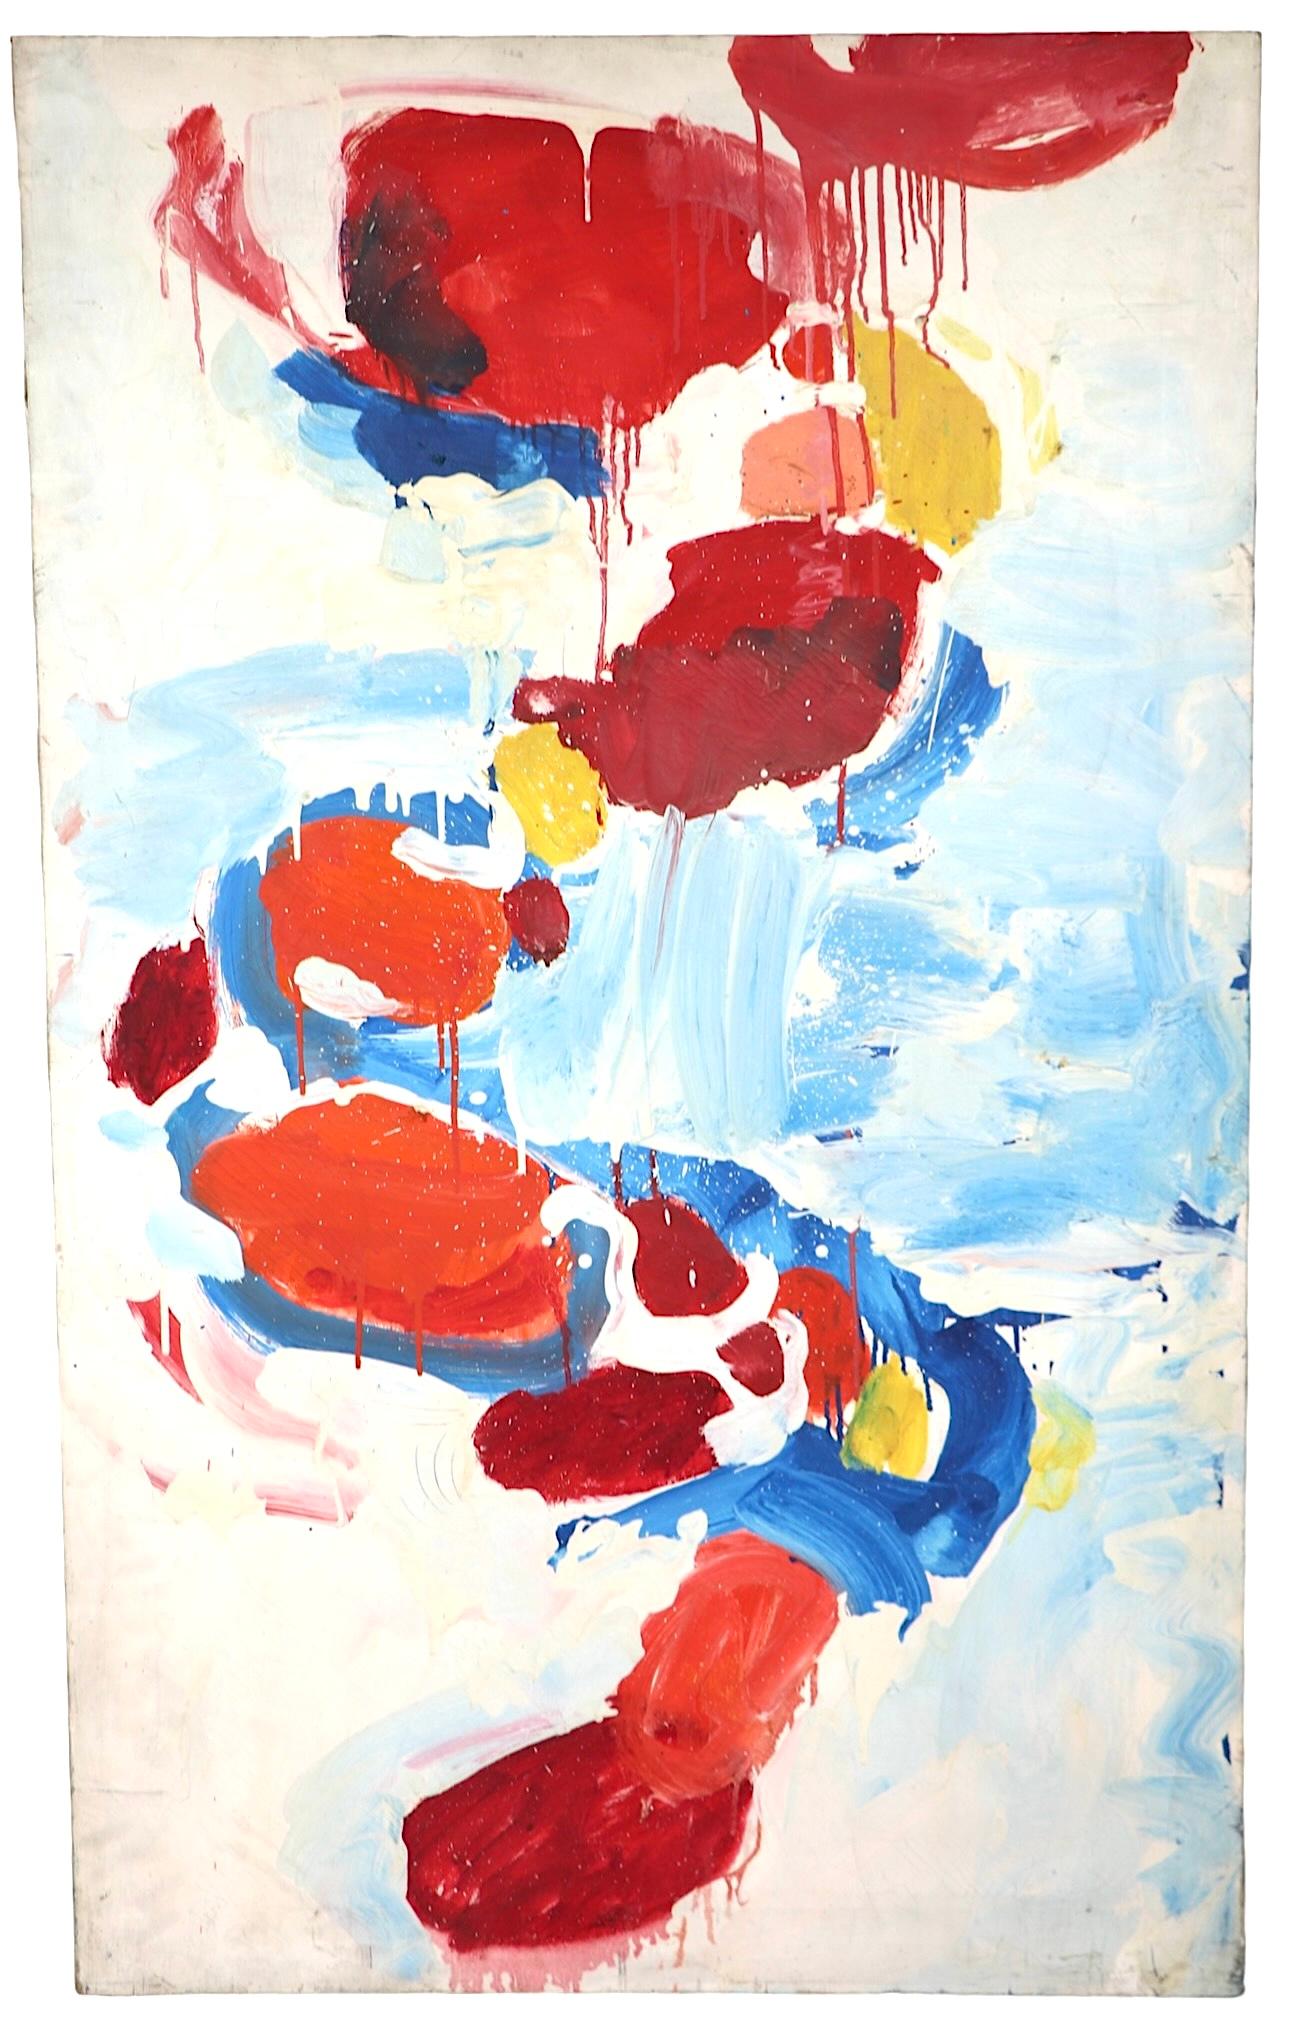 Intriguing abstract painting by noted NYC artist Jules Ganowitter. The painting features bold  colors ( red, orange,  blue, yellow ) which snake up the canvas in an organic vertical form, on a white and  light blue background. This example is one of